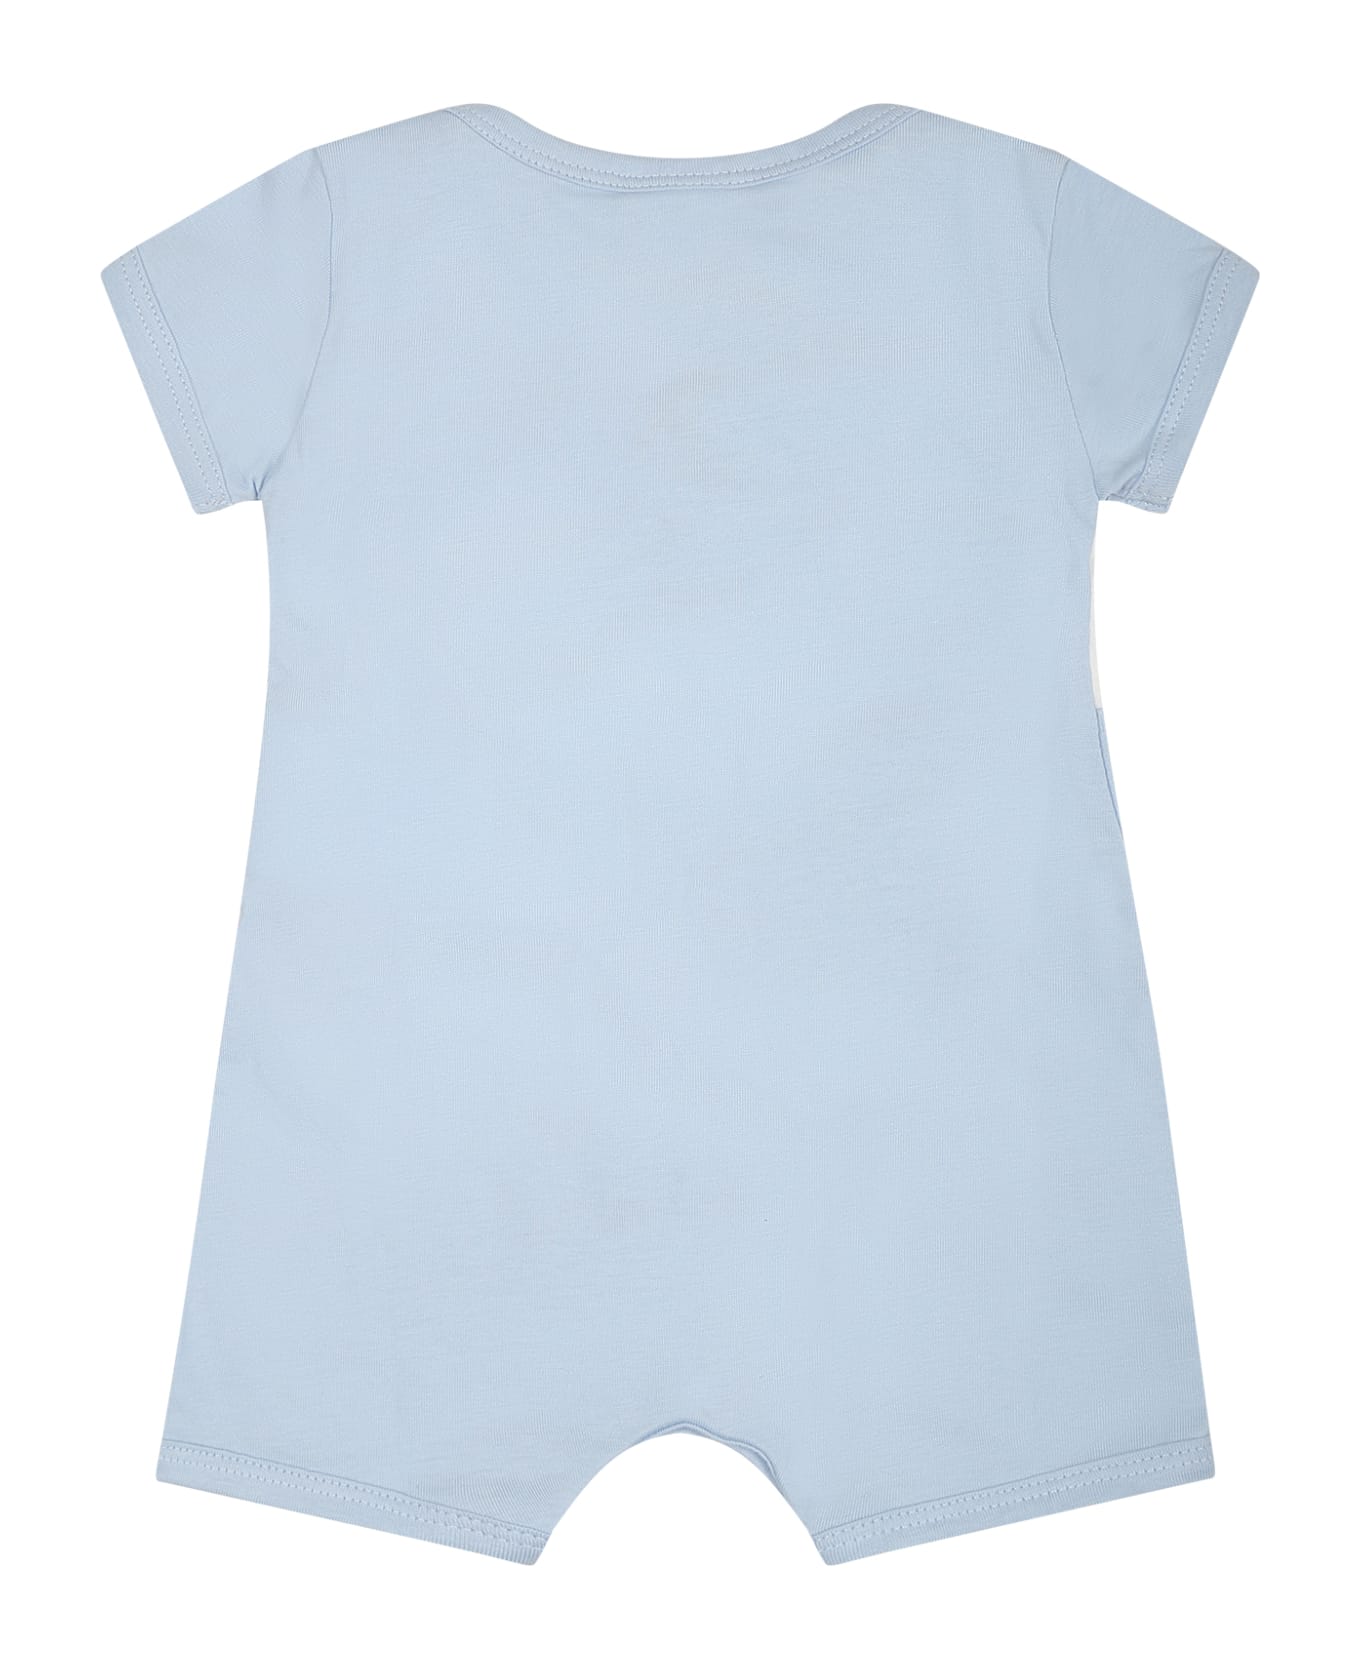 GCDS Mini Jumpsuit For Babies With Logo - Light Blue ボディスーツ＆セットアップ